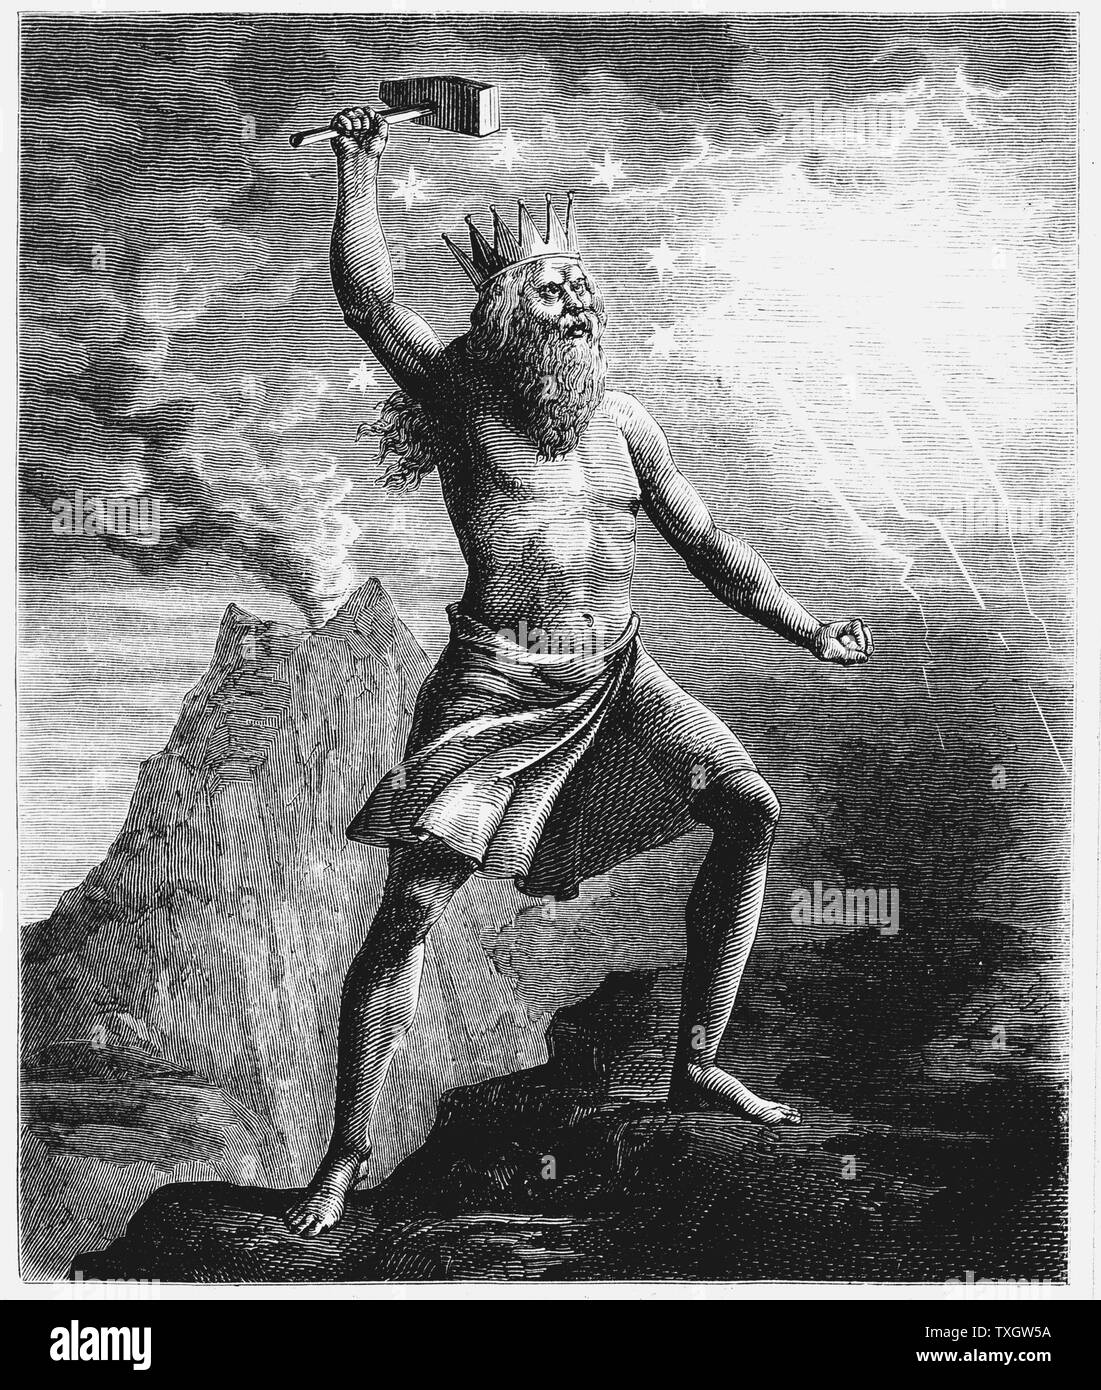 Thor, son of Woden or Odin. God of thunder in the Scandinavian pantheon, shown wielding his hammer, symbolising thunder and lightning, as he reconstructed the globe.  1874  Wood engraving Stock Photo